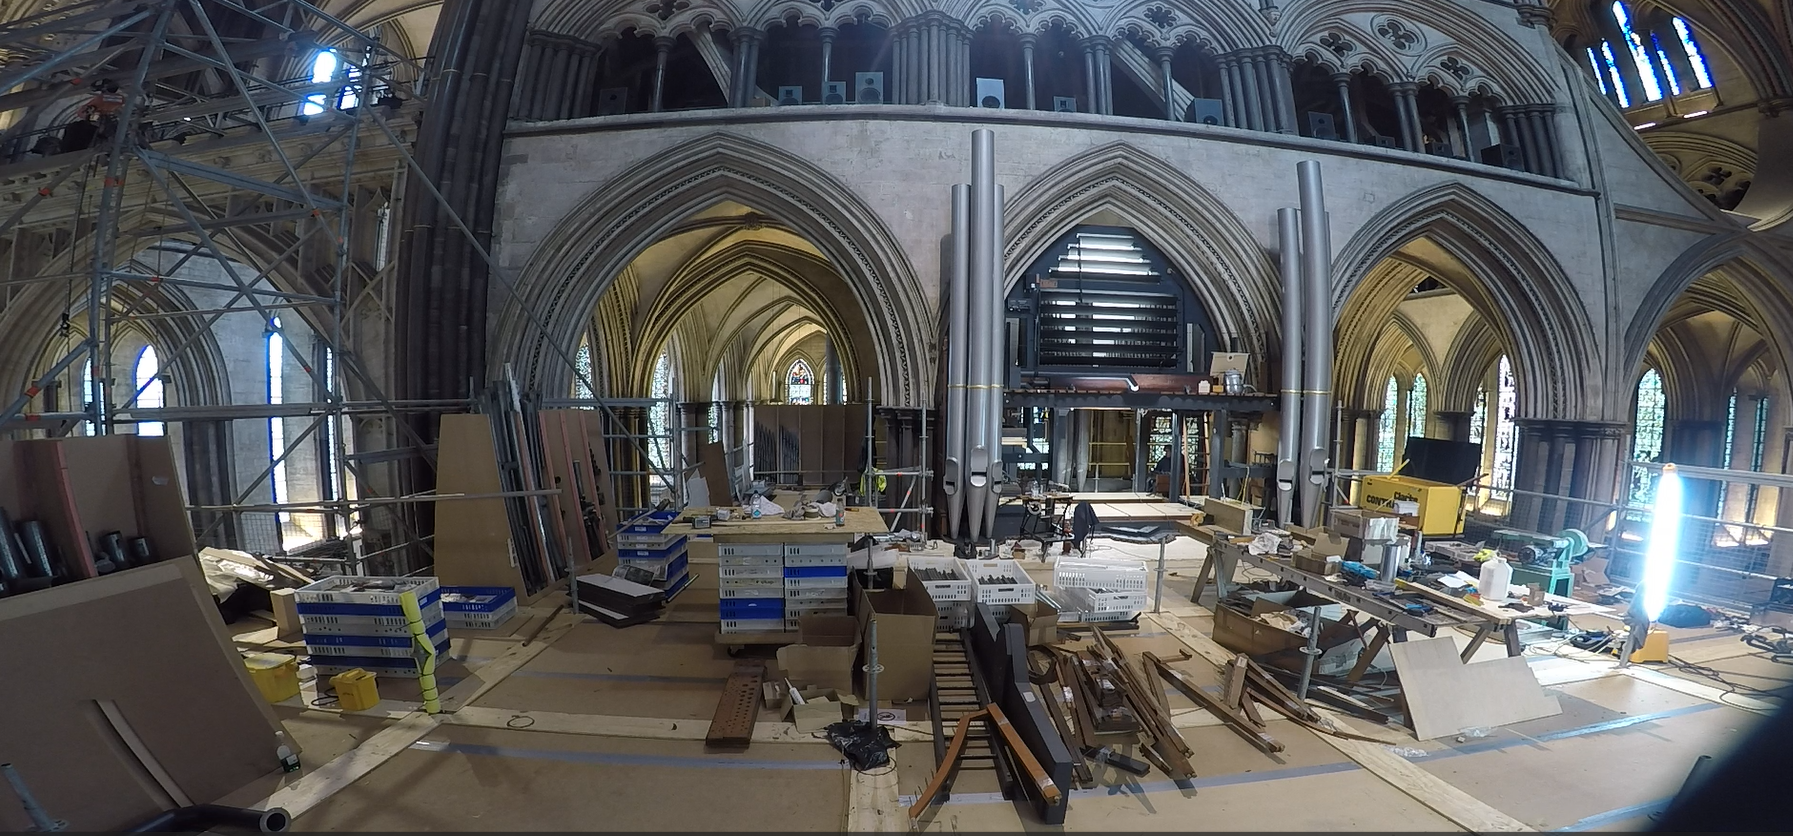 View of the organ pipes being removed for restoration.